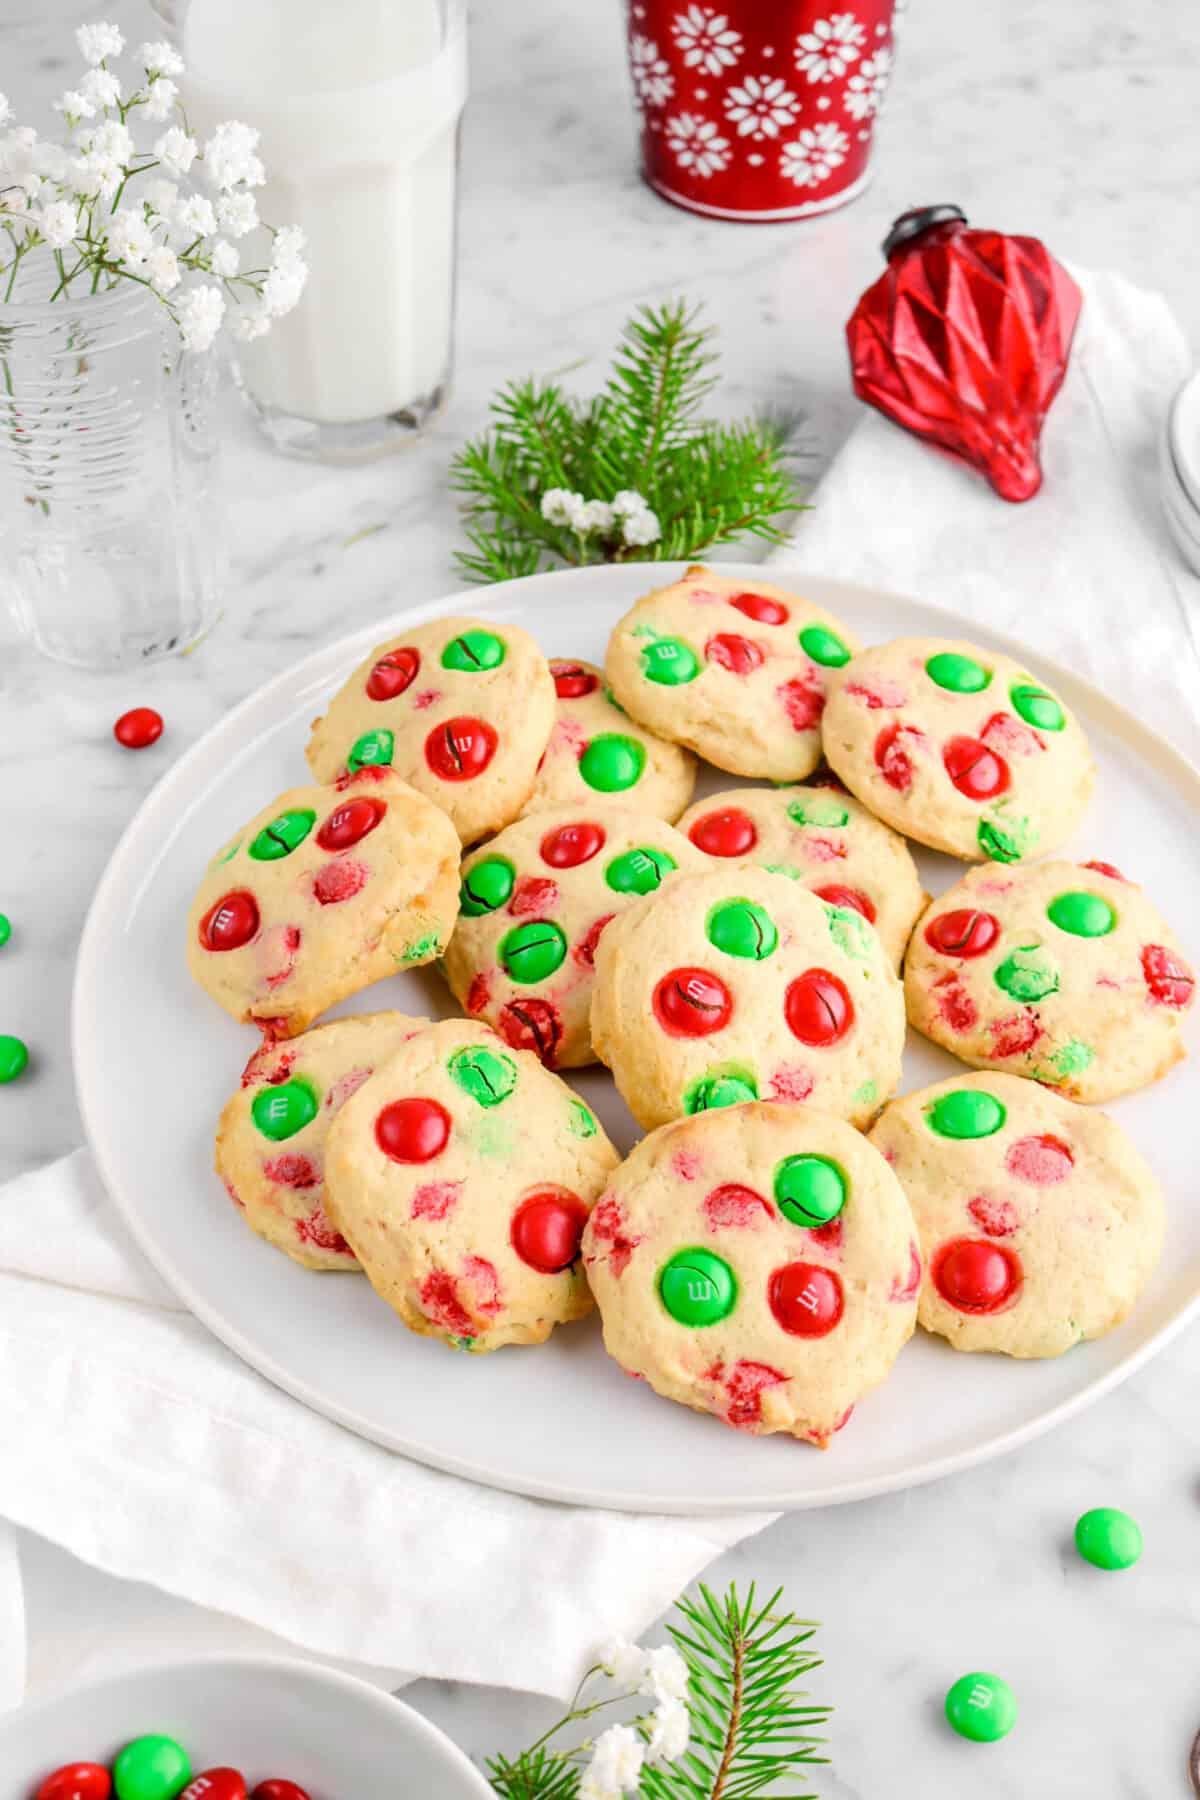 m*m cookies on white plate with red ornament, glass of milk, and greenery